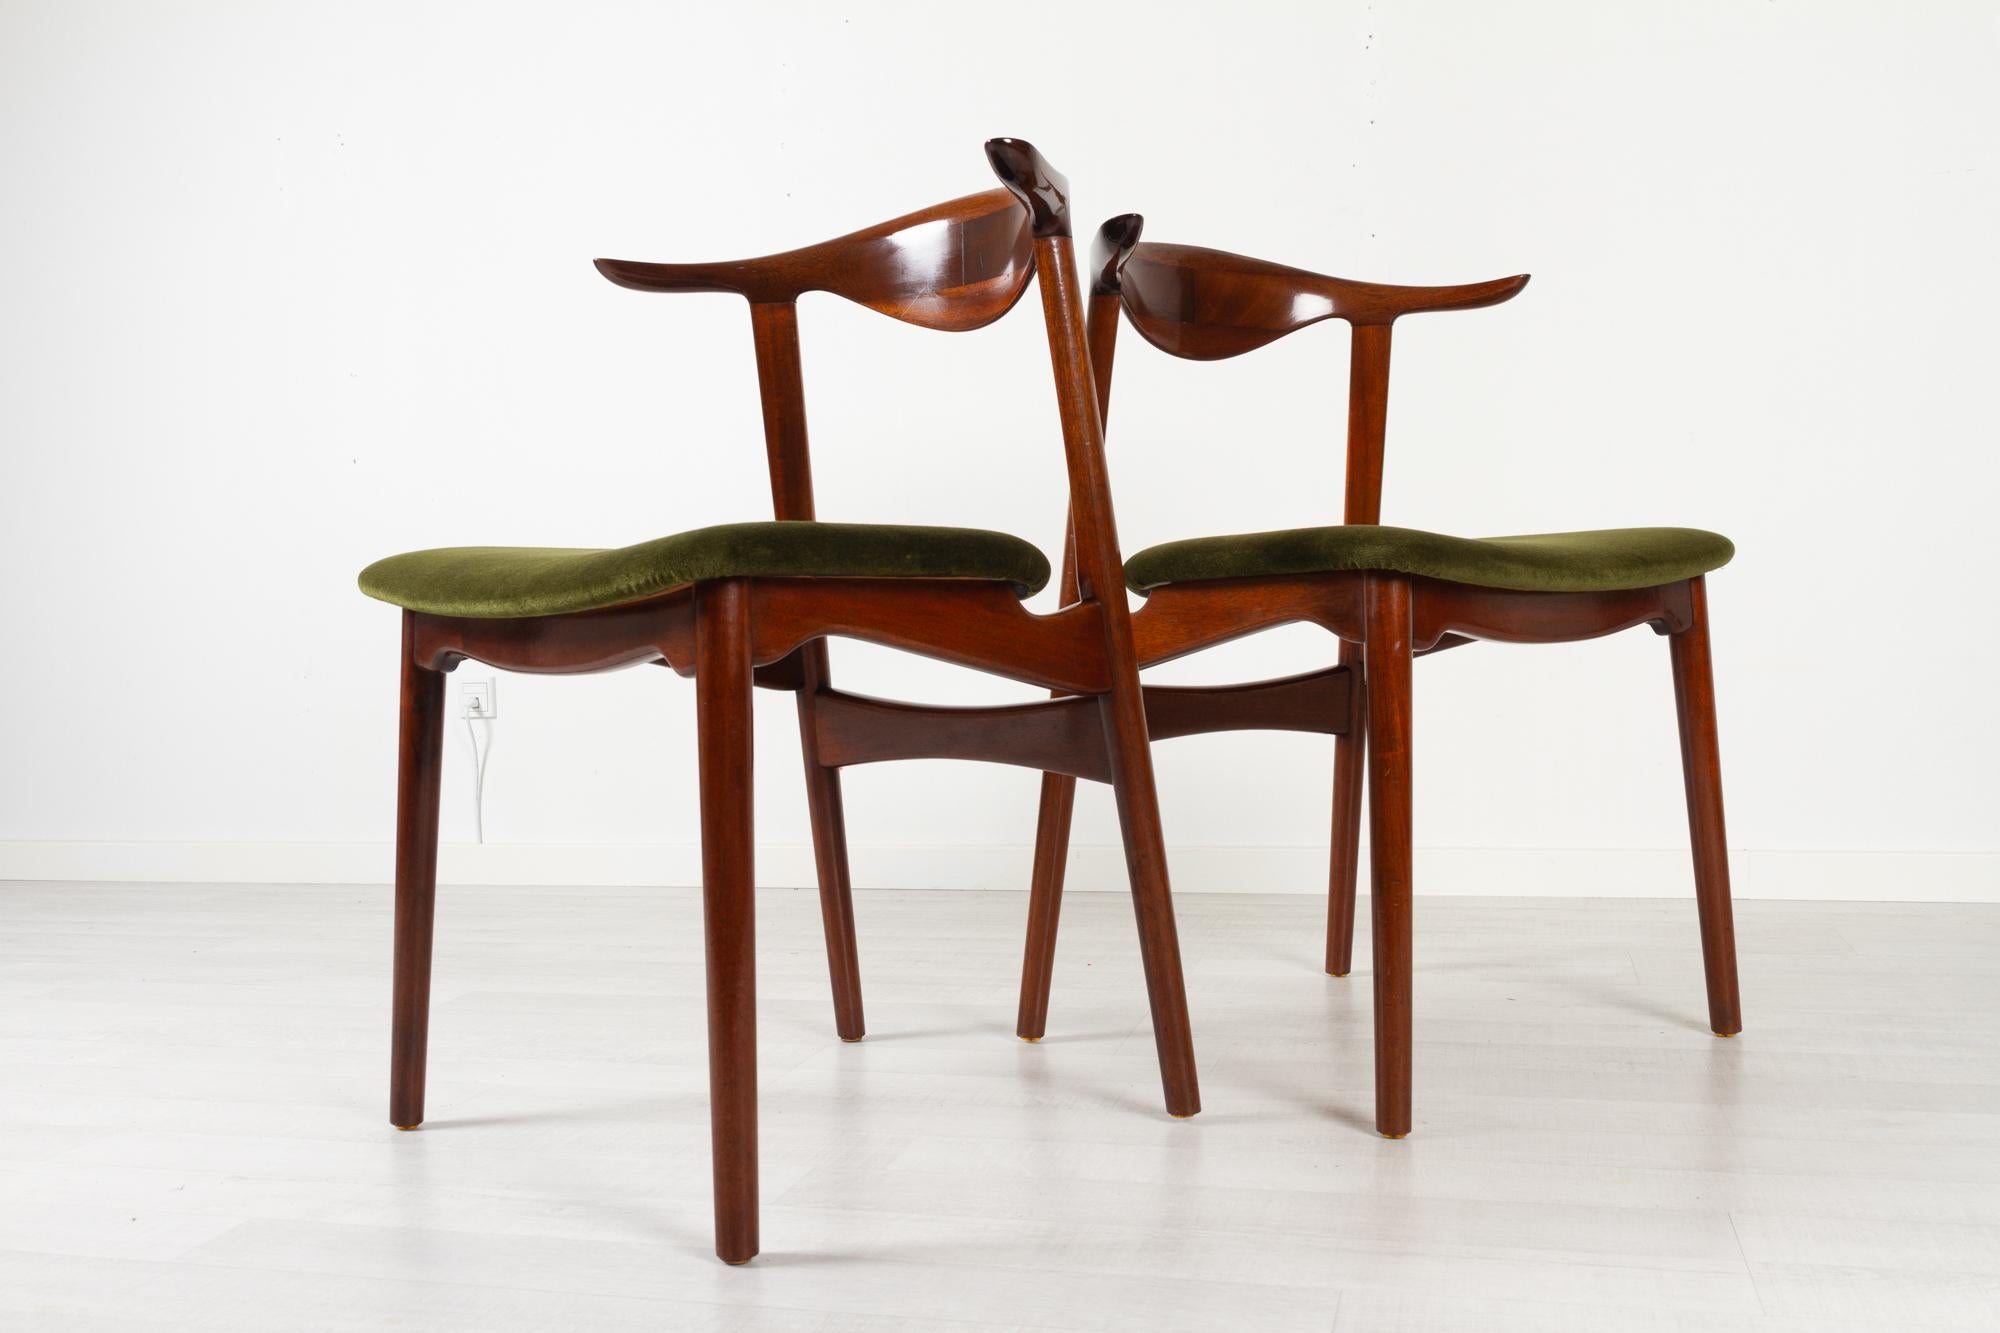 Vintage Danish Mahogany Cowhorn Chairs 1940s, Set of 6 For Sale 6